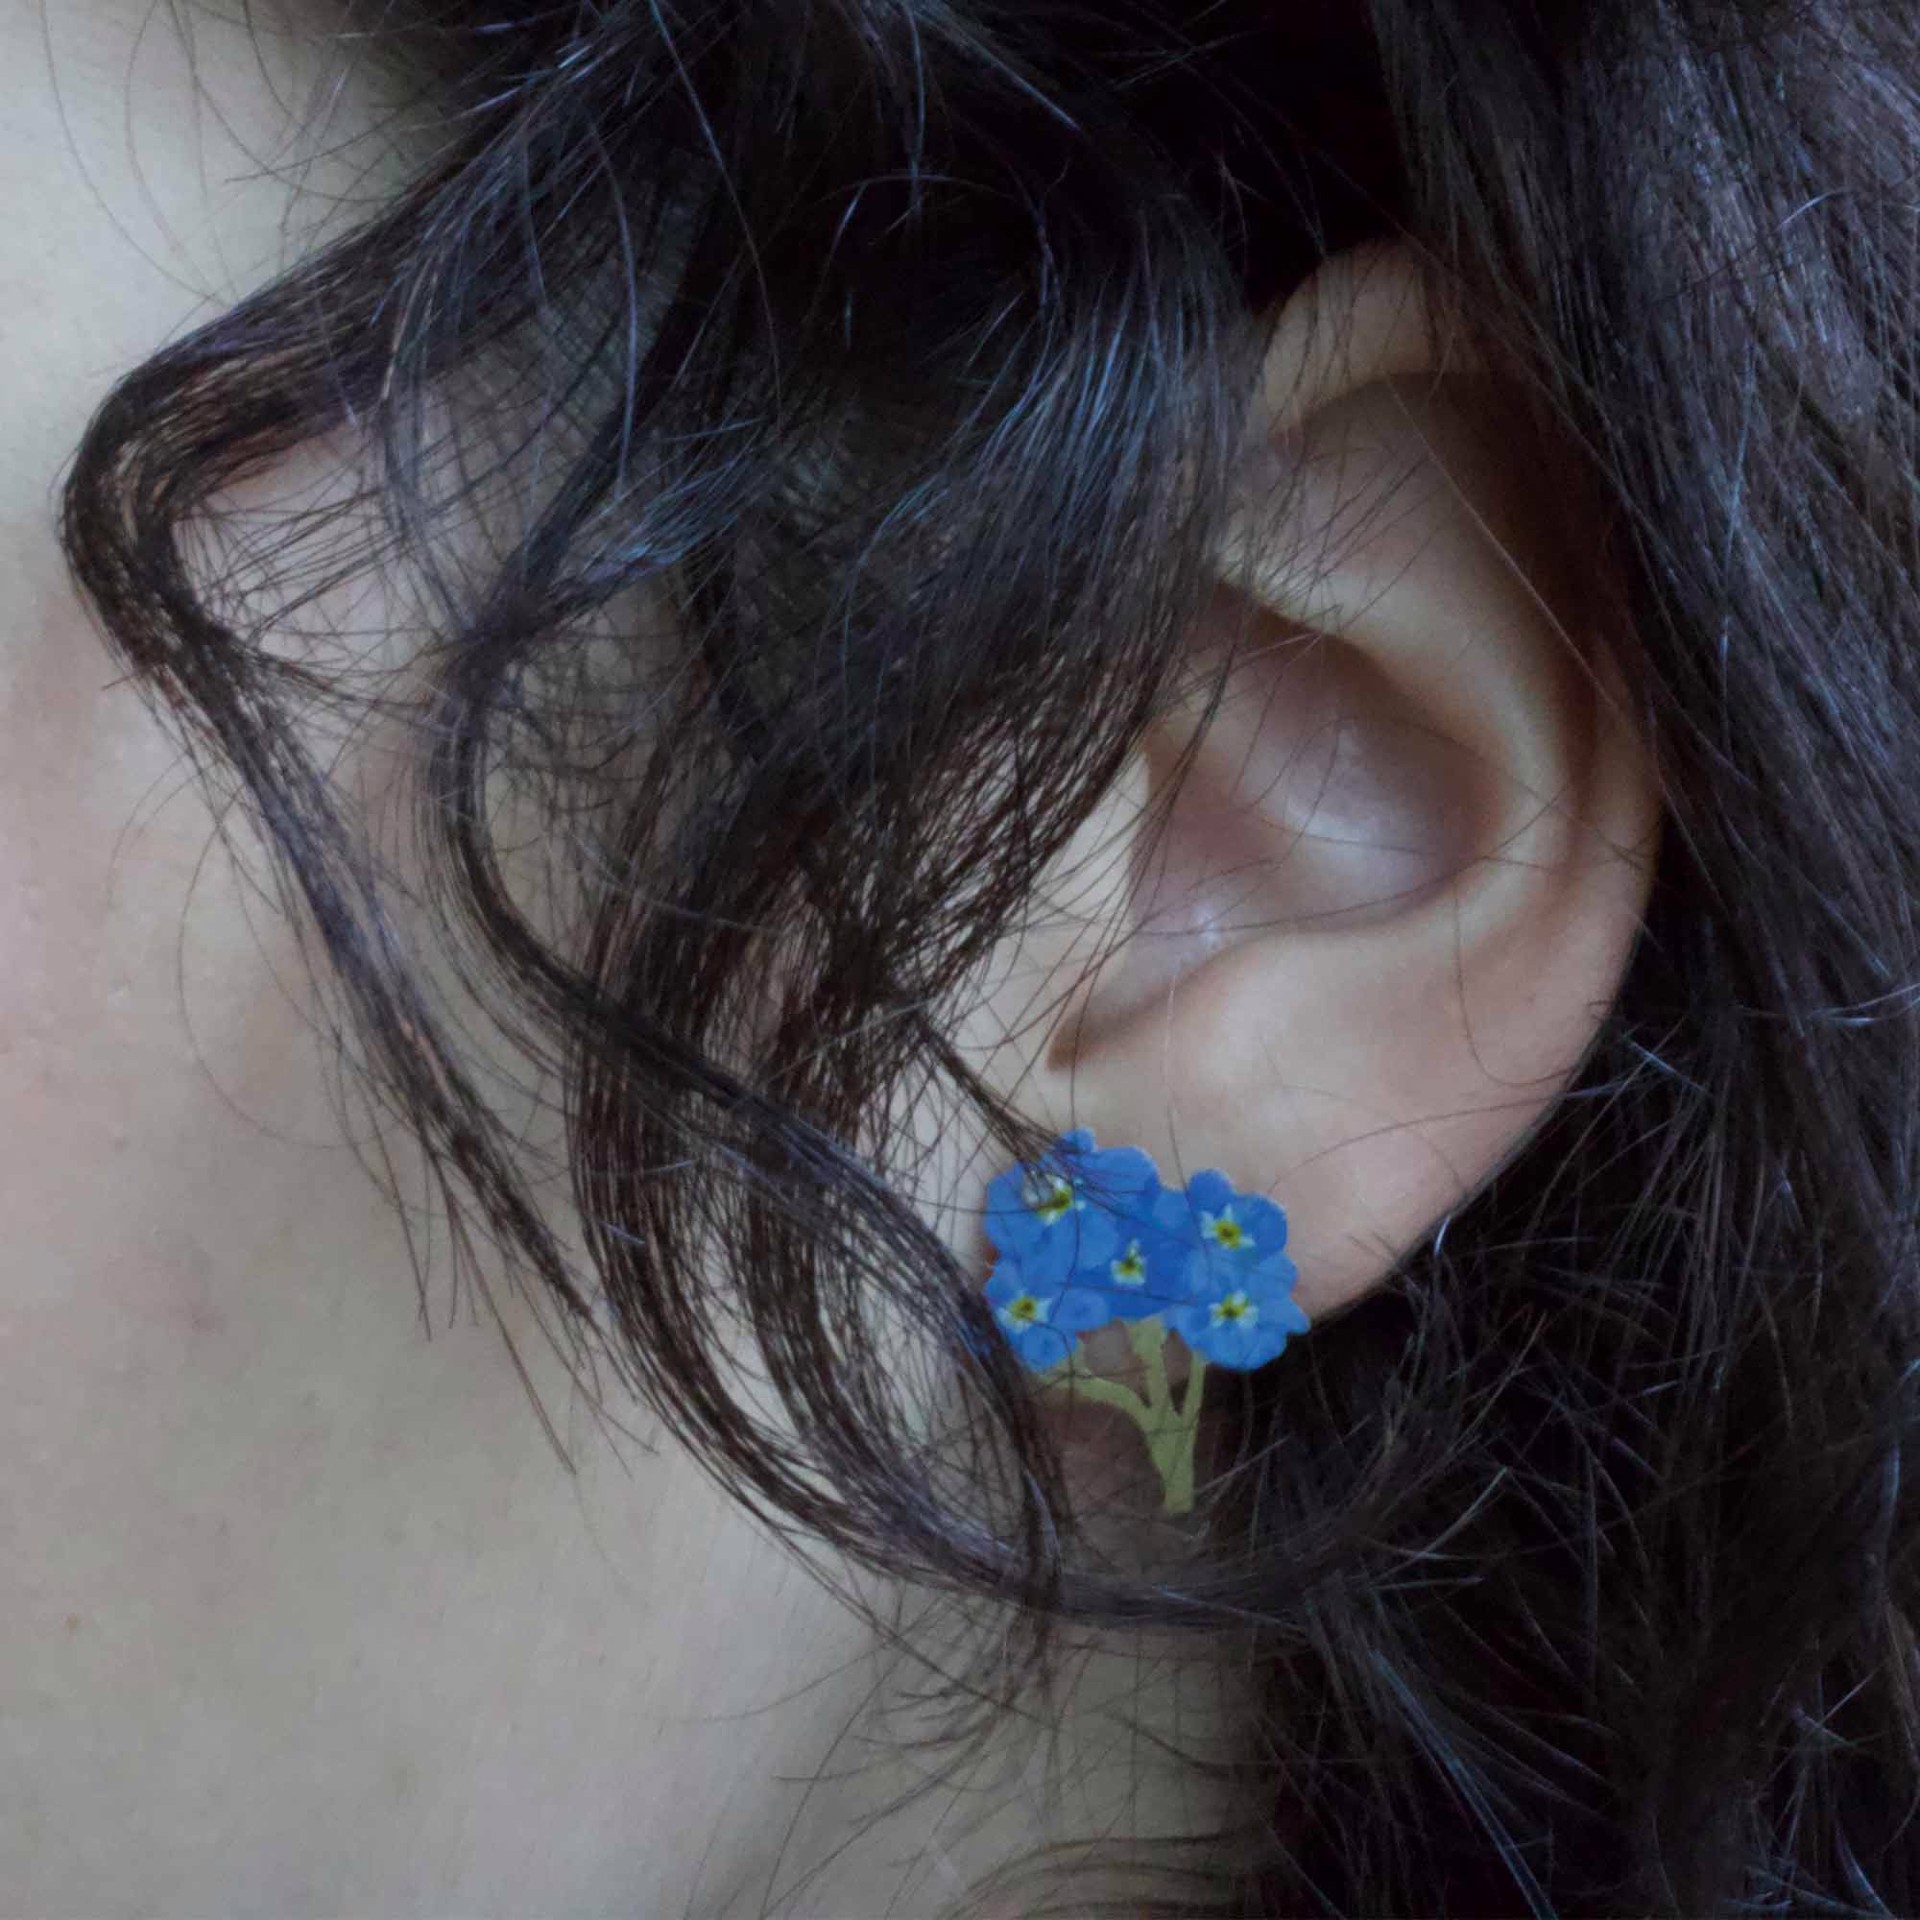 Natura Morta: Forget-Me-Not Earrings by Christopher Thompson-Royds